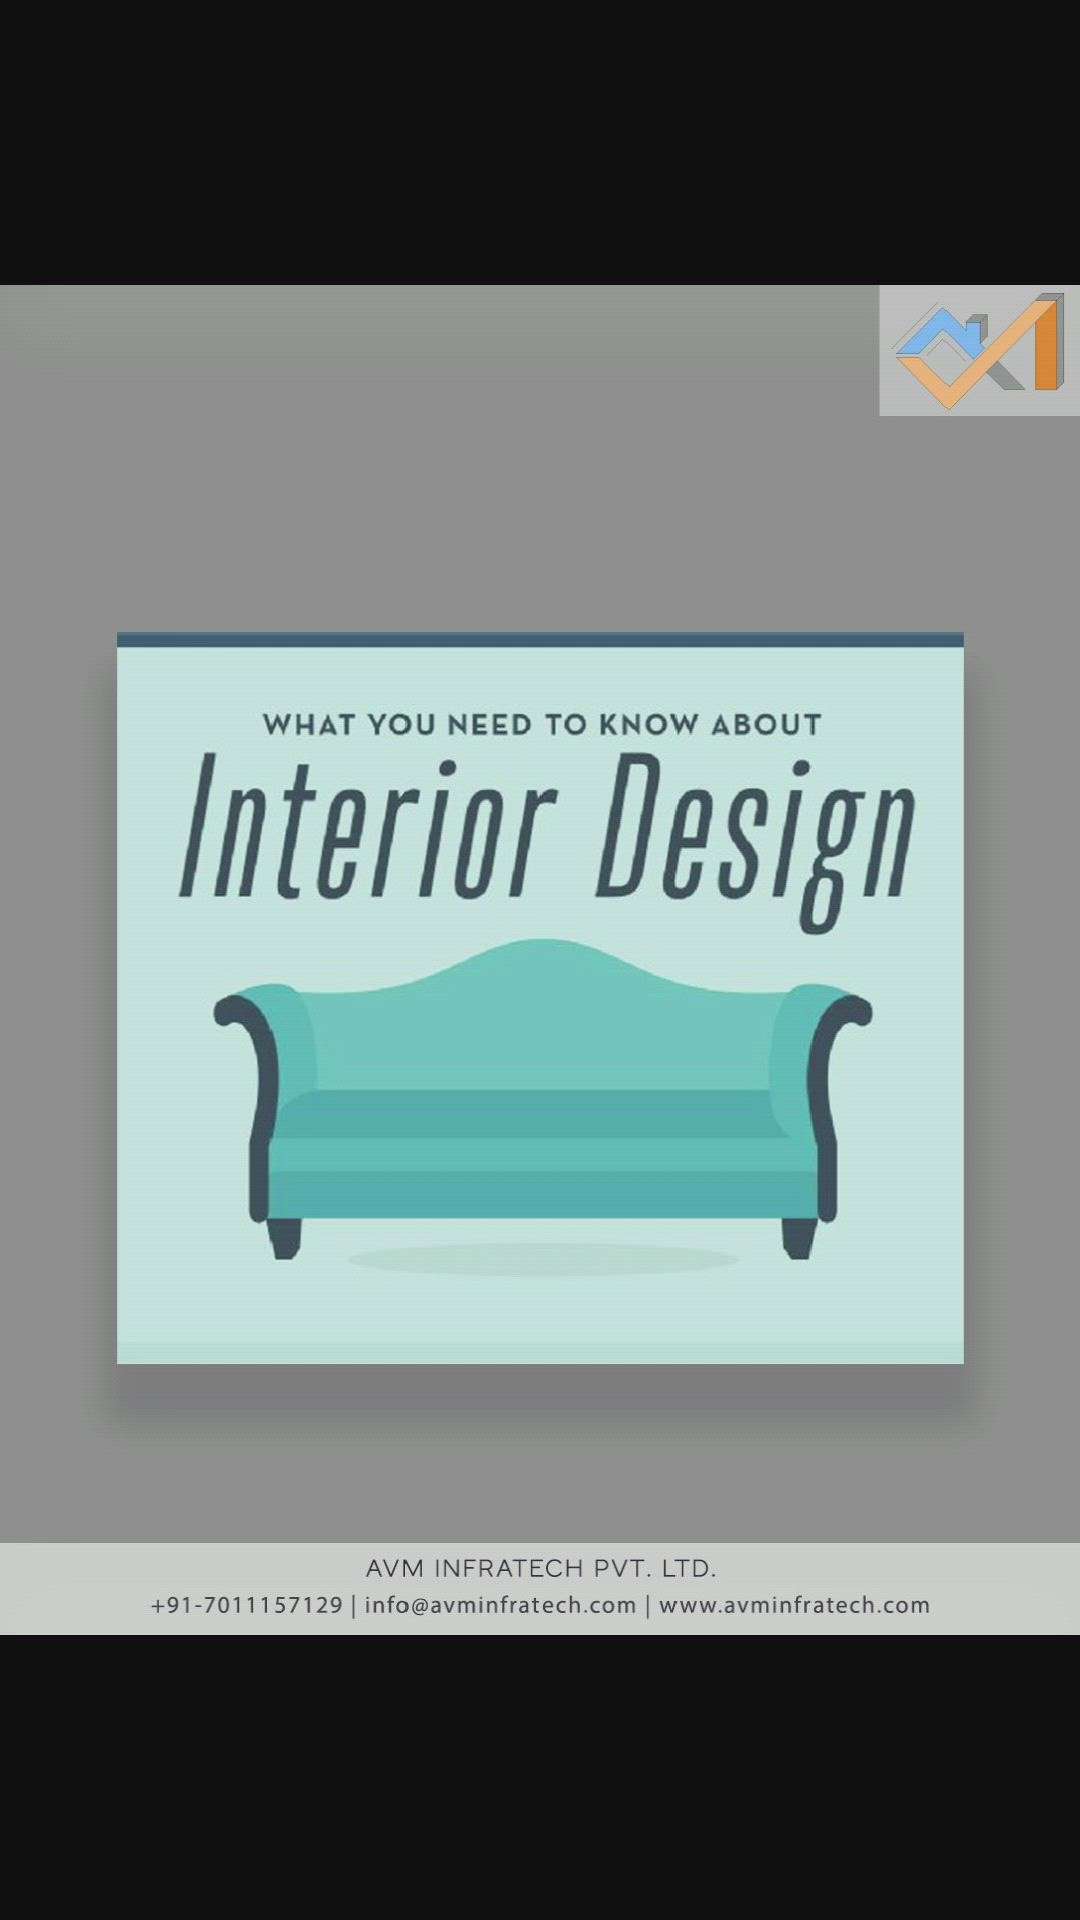 What you need to know about interior design.


Follow us for more such amazing informations. 
.
.
#interior #interiordesign #information #housedesign #homedecoration #homeinterior #interiorinspiration #architecture #architect #designprocess #designing #things #to #consider #howtodesign #home #house #housedesign #avminfratech